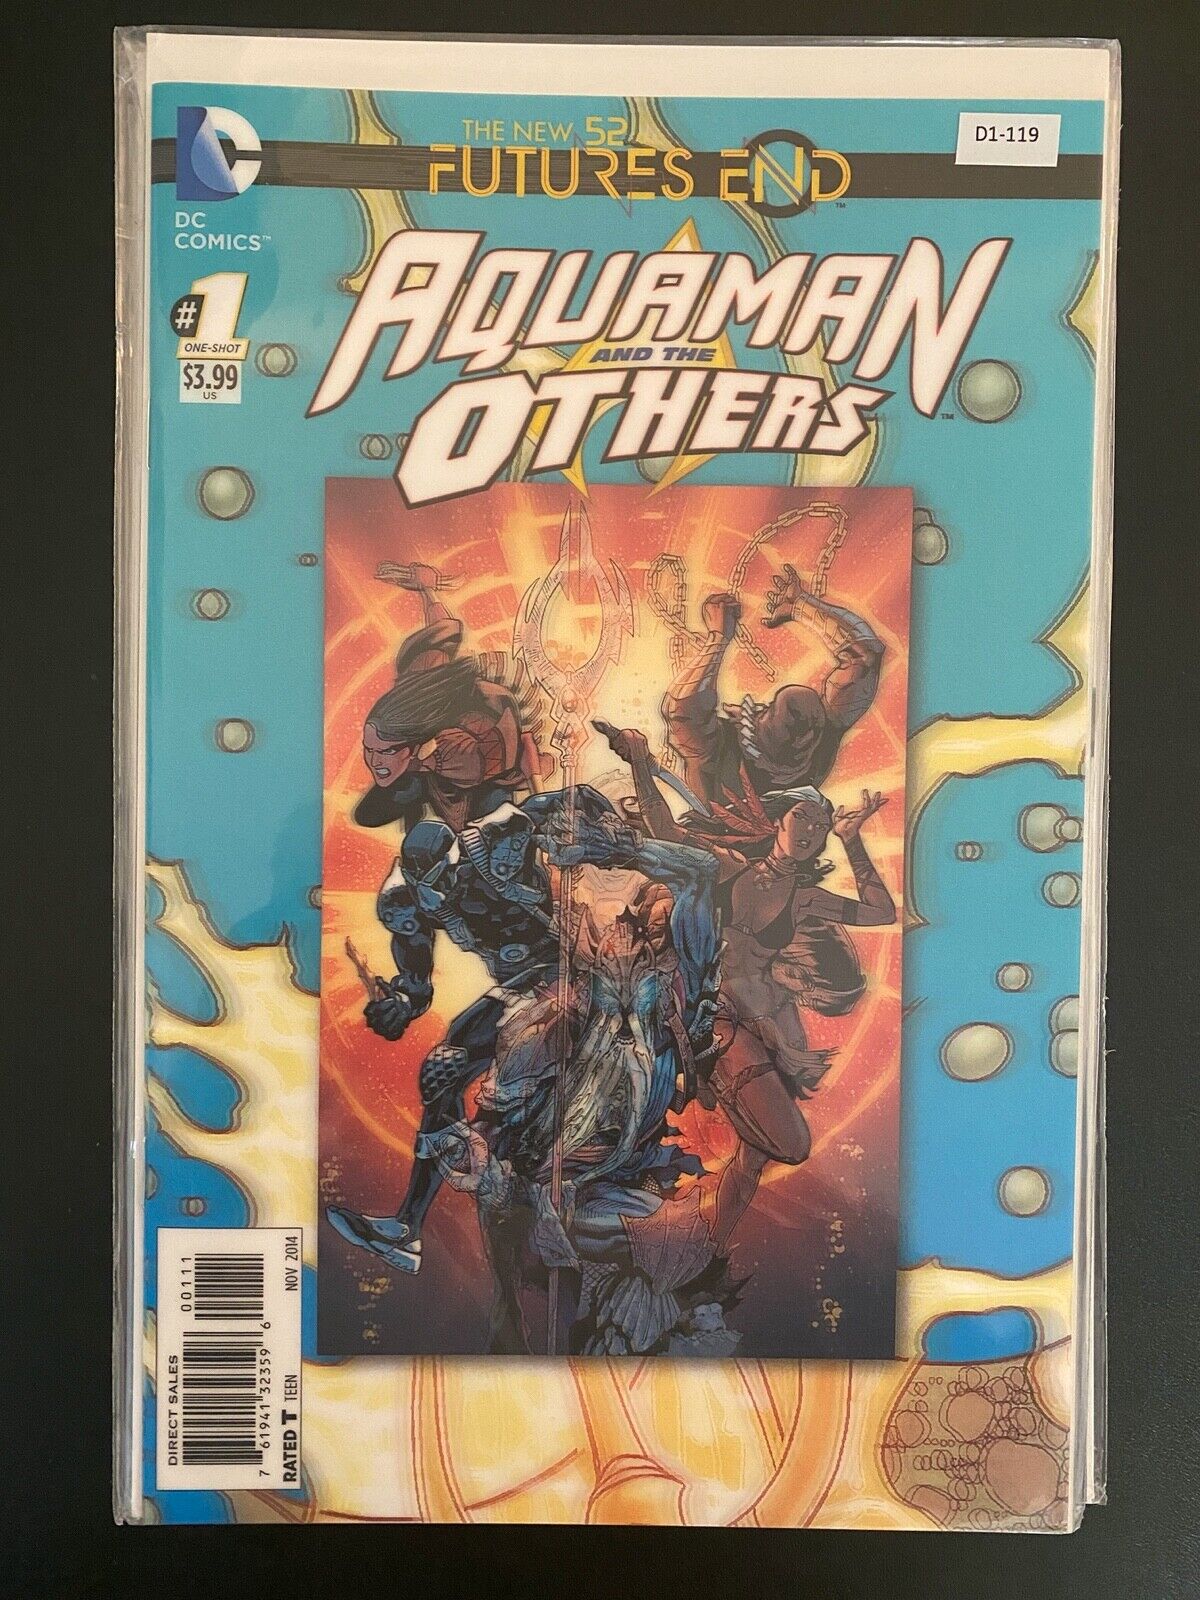 Aquaman and the Others 1 Lenticular Cover Variant High Grade DC Comic D1-119